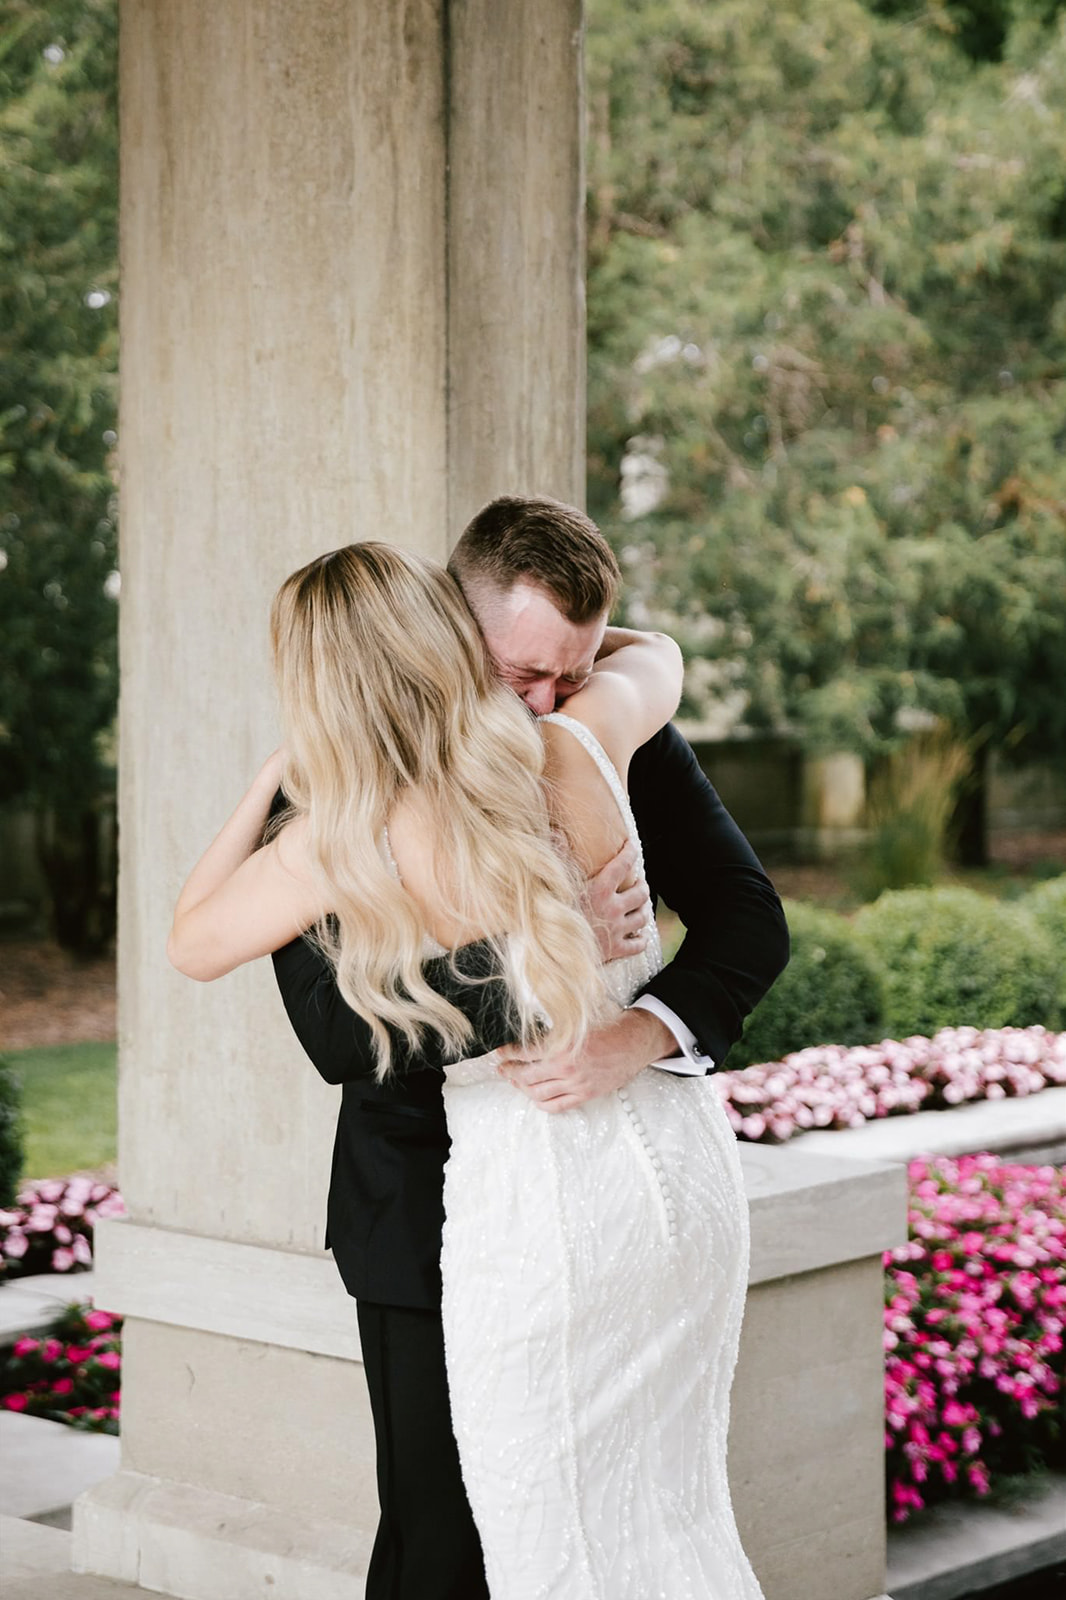 Bride and groom's heartfelt first look captured at Armour House, Lake Forest, sets the tone for a romantic wedding day.